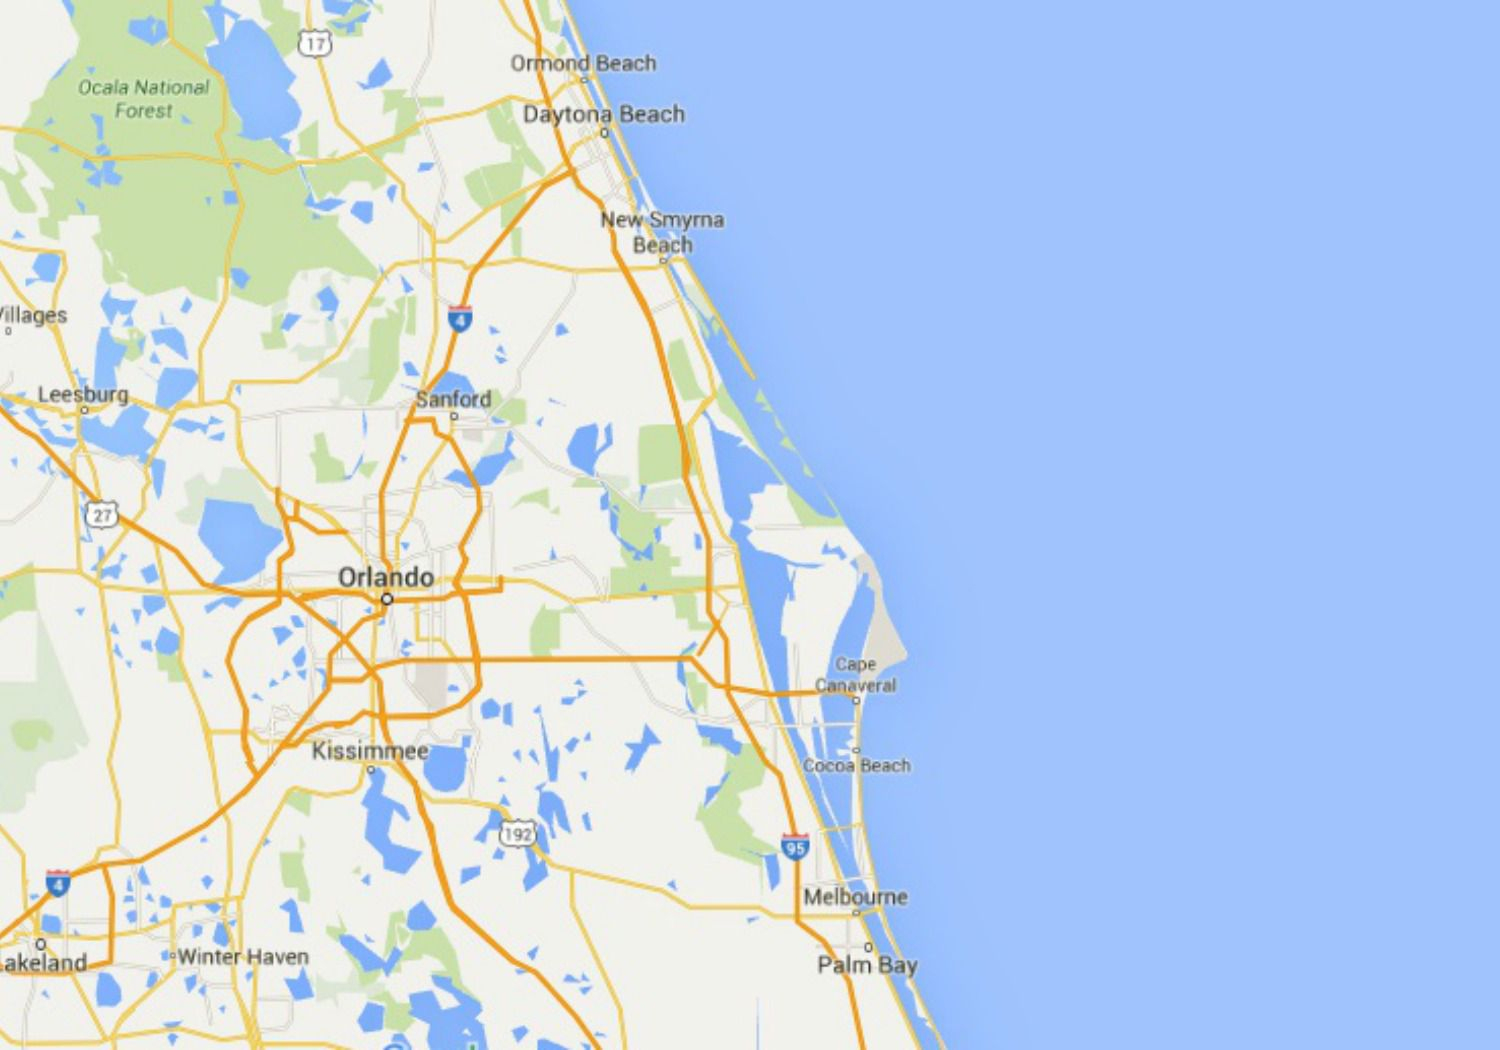 Maps Of Florida: Orlando, Tampa, Miami, Keys, And More - Map Of Florida Showing Tampa And Clearwater